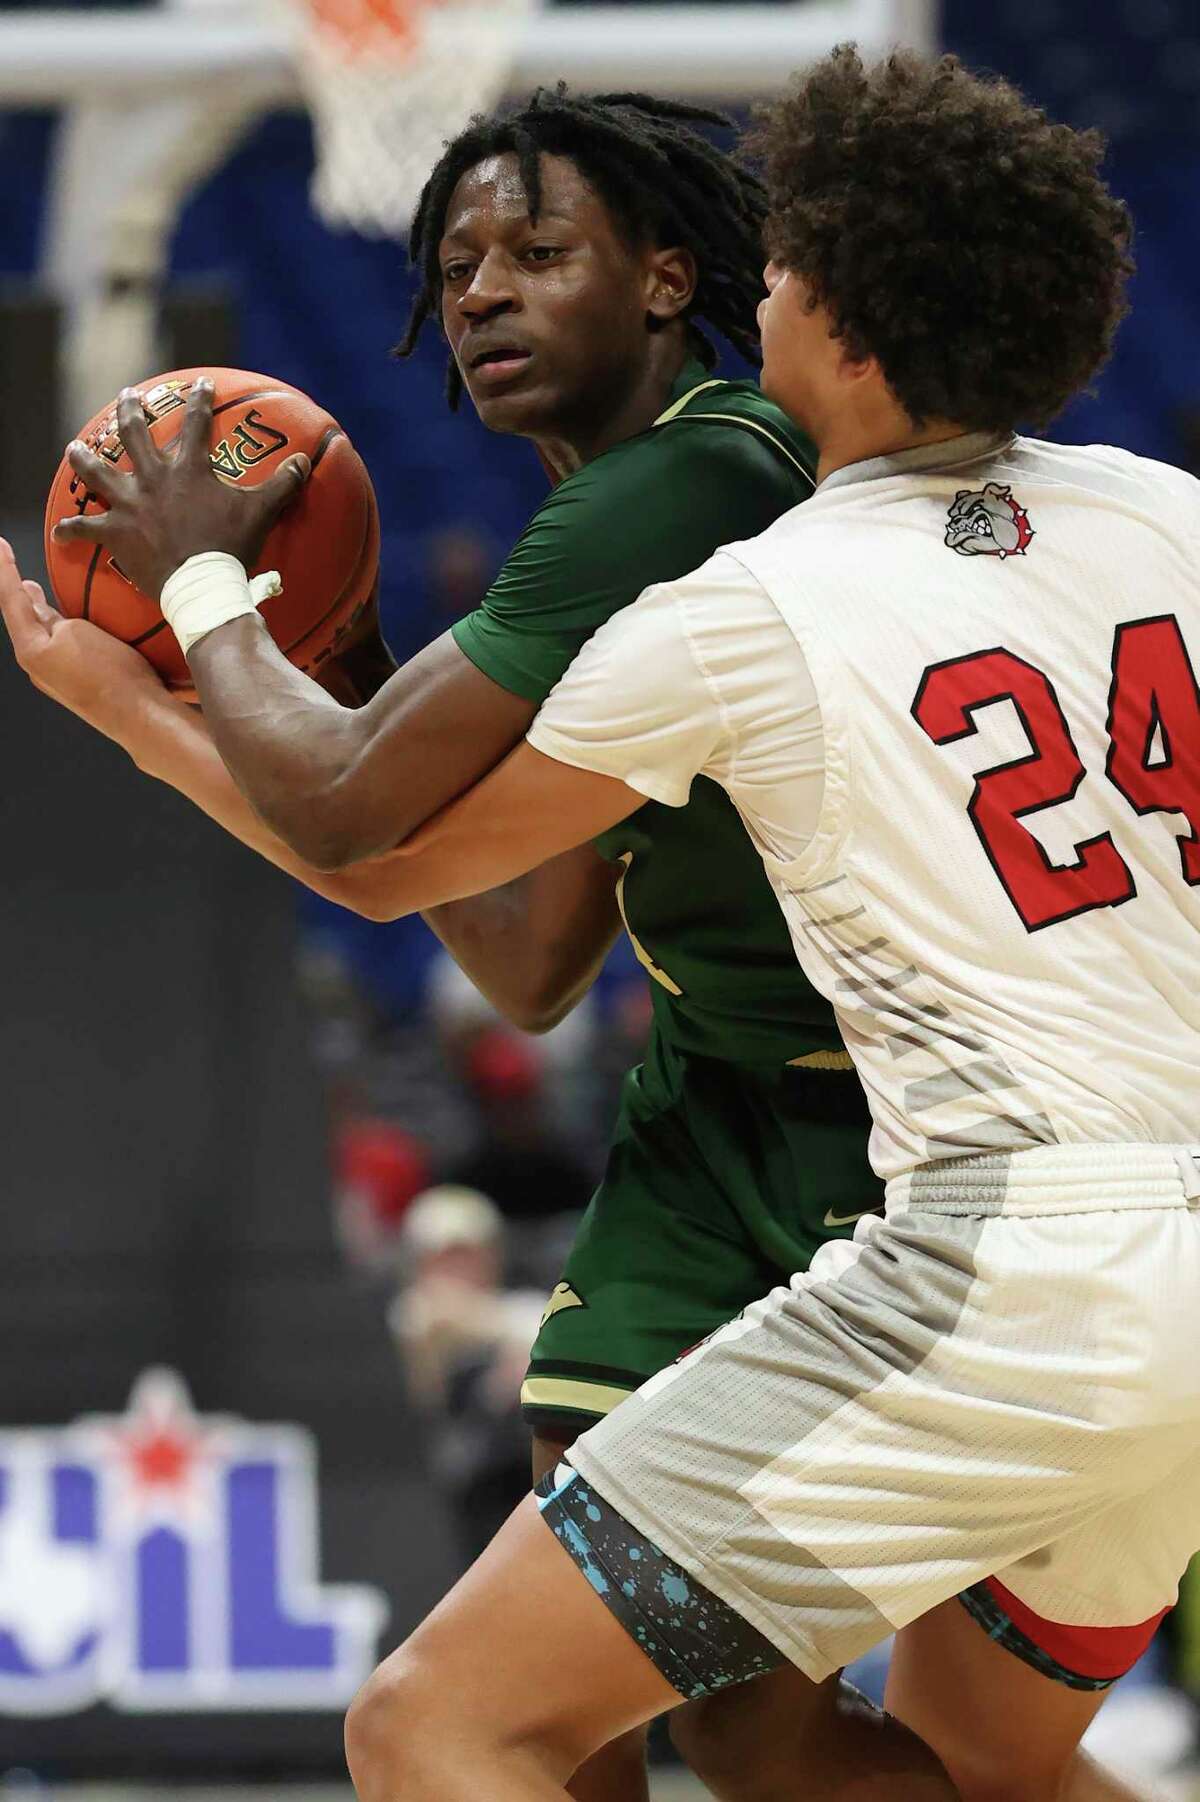 Cole Cougars' Dre Ray is defended by Hitchcock Bulldogs' Lloyd Jones III during the second half of the Class 3A State Semifinals at the Alamodome, Thursday, March 10, 2022. Cole won, 53-49 and moves on to the final game against Dallas Madison on Saturday.